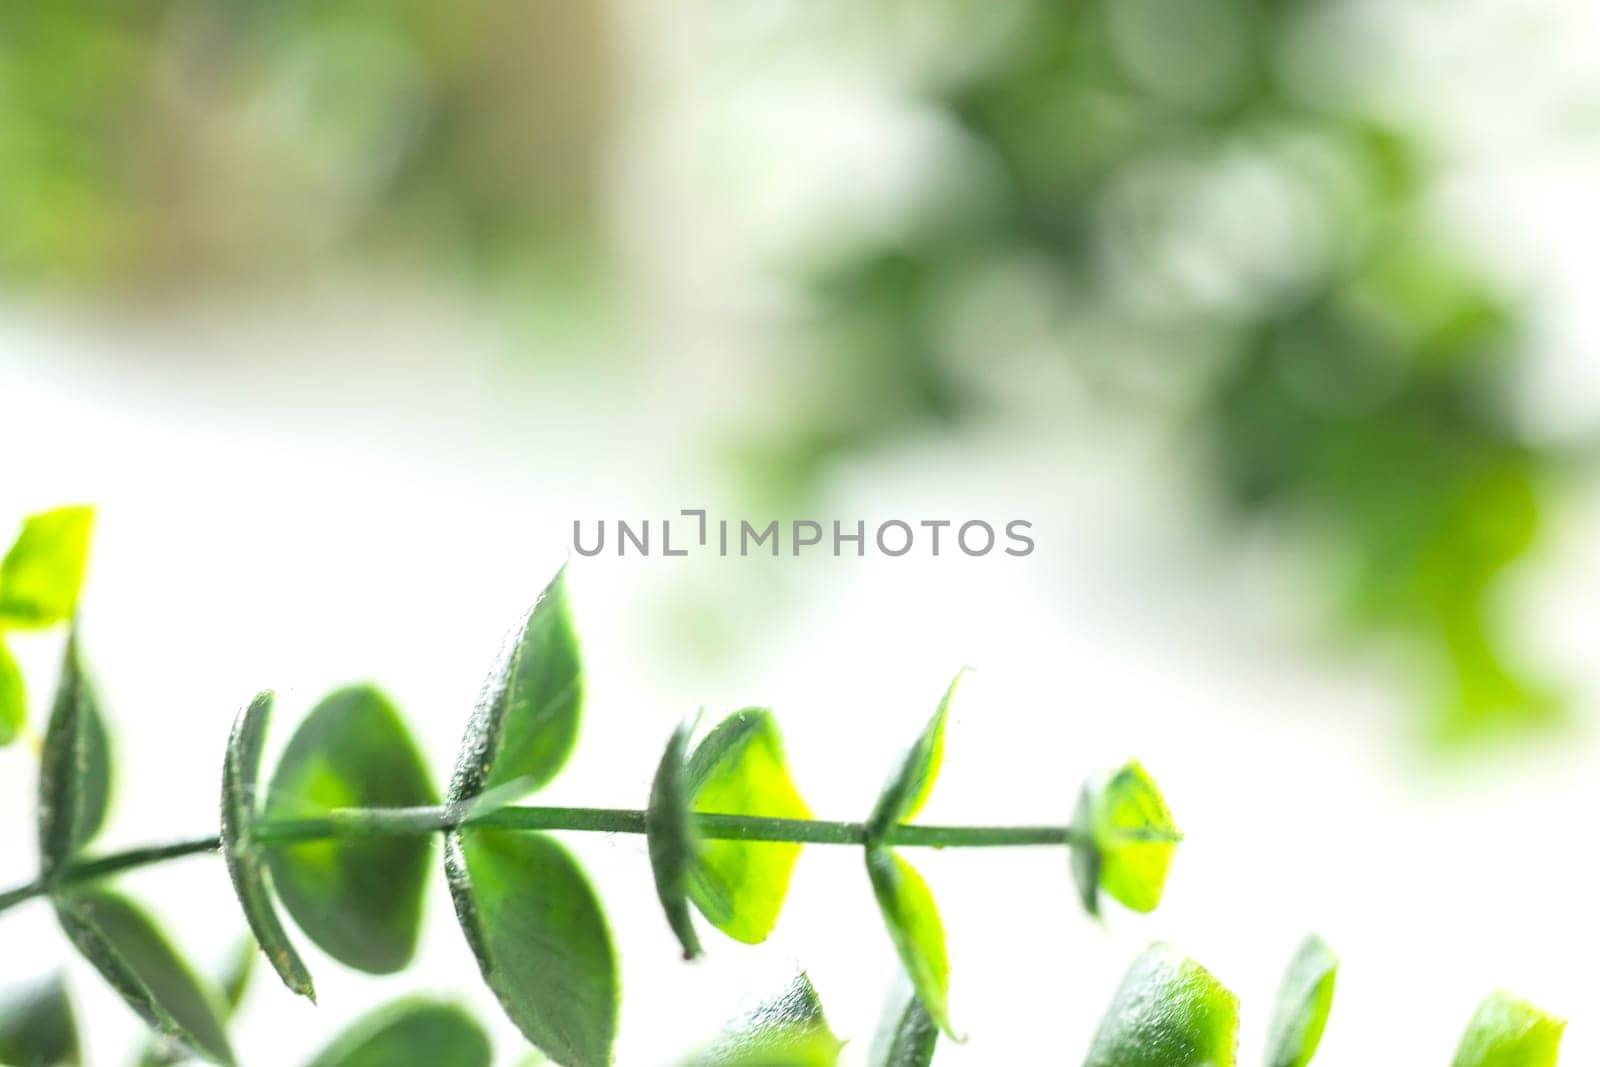 Green leaves border defocus on white background, edge of green plant with copy space. Natural and freshness ecology concept. spring beauty element space for text